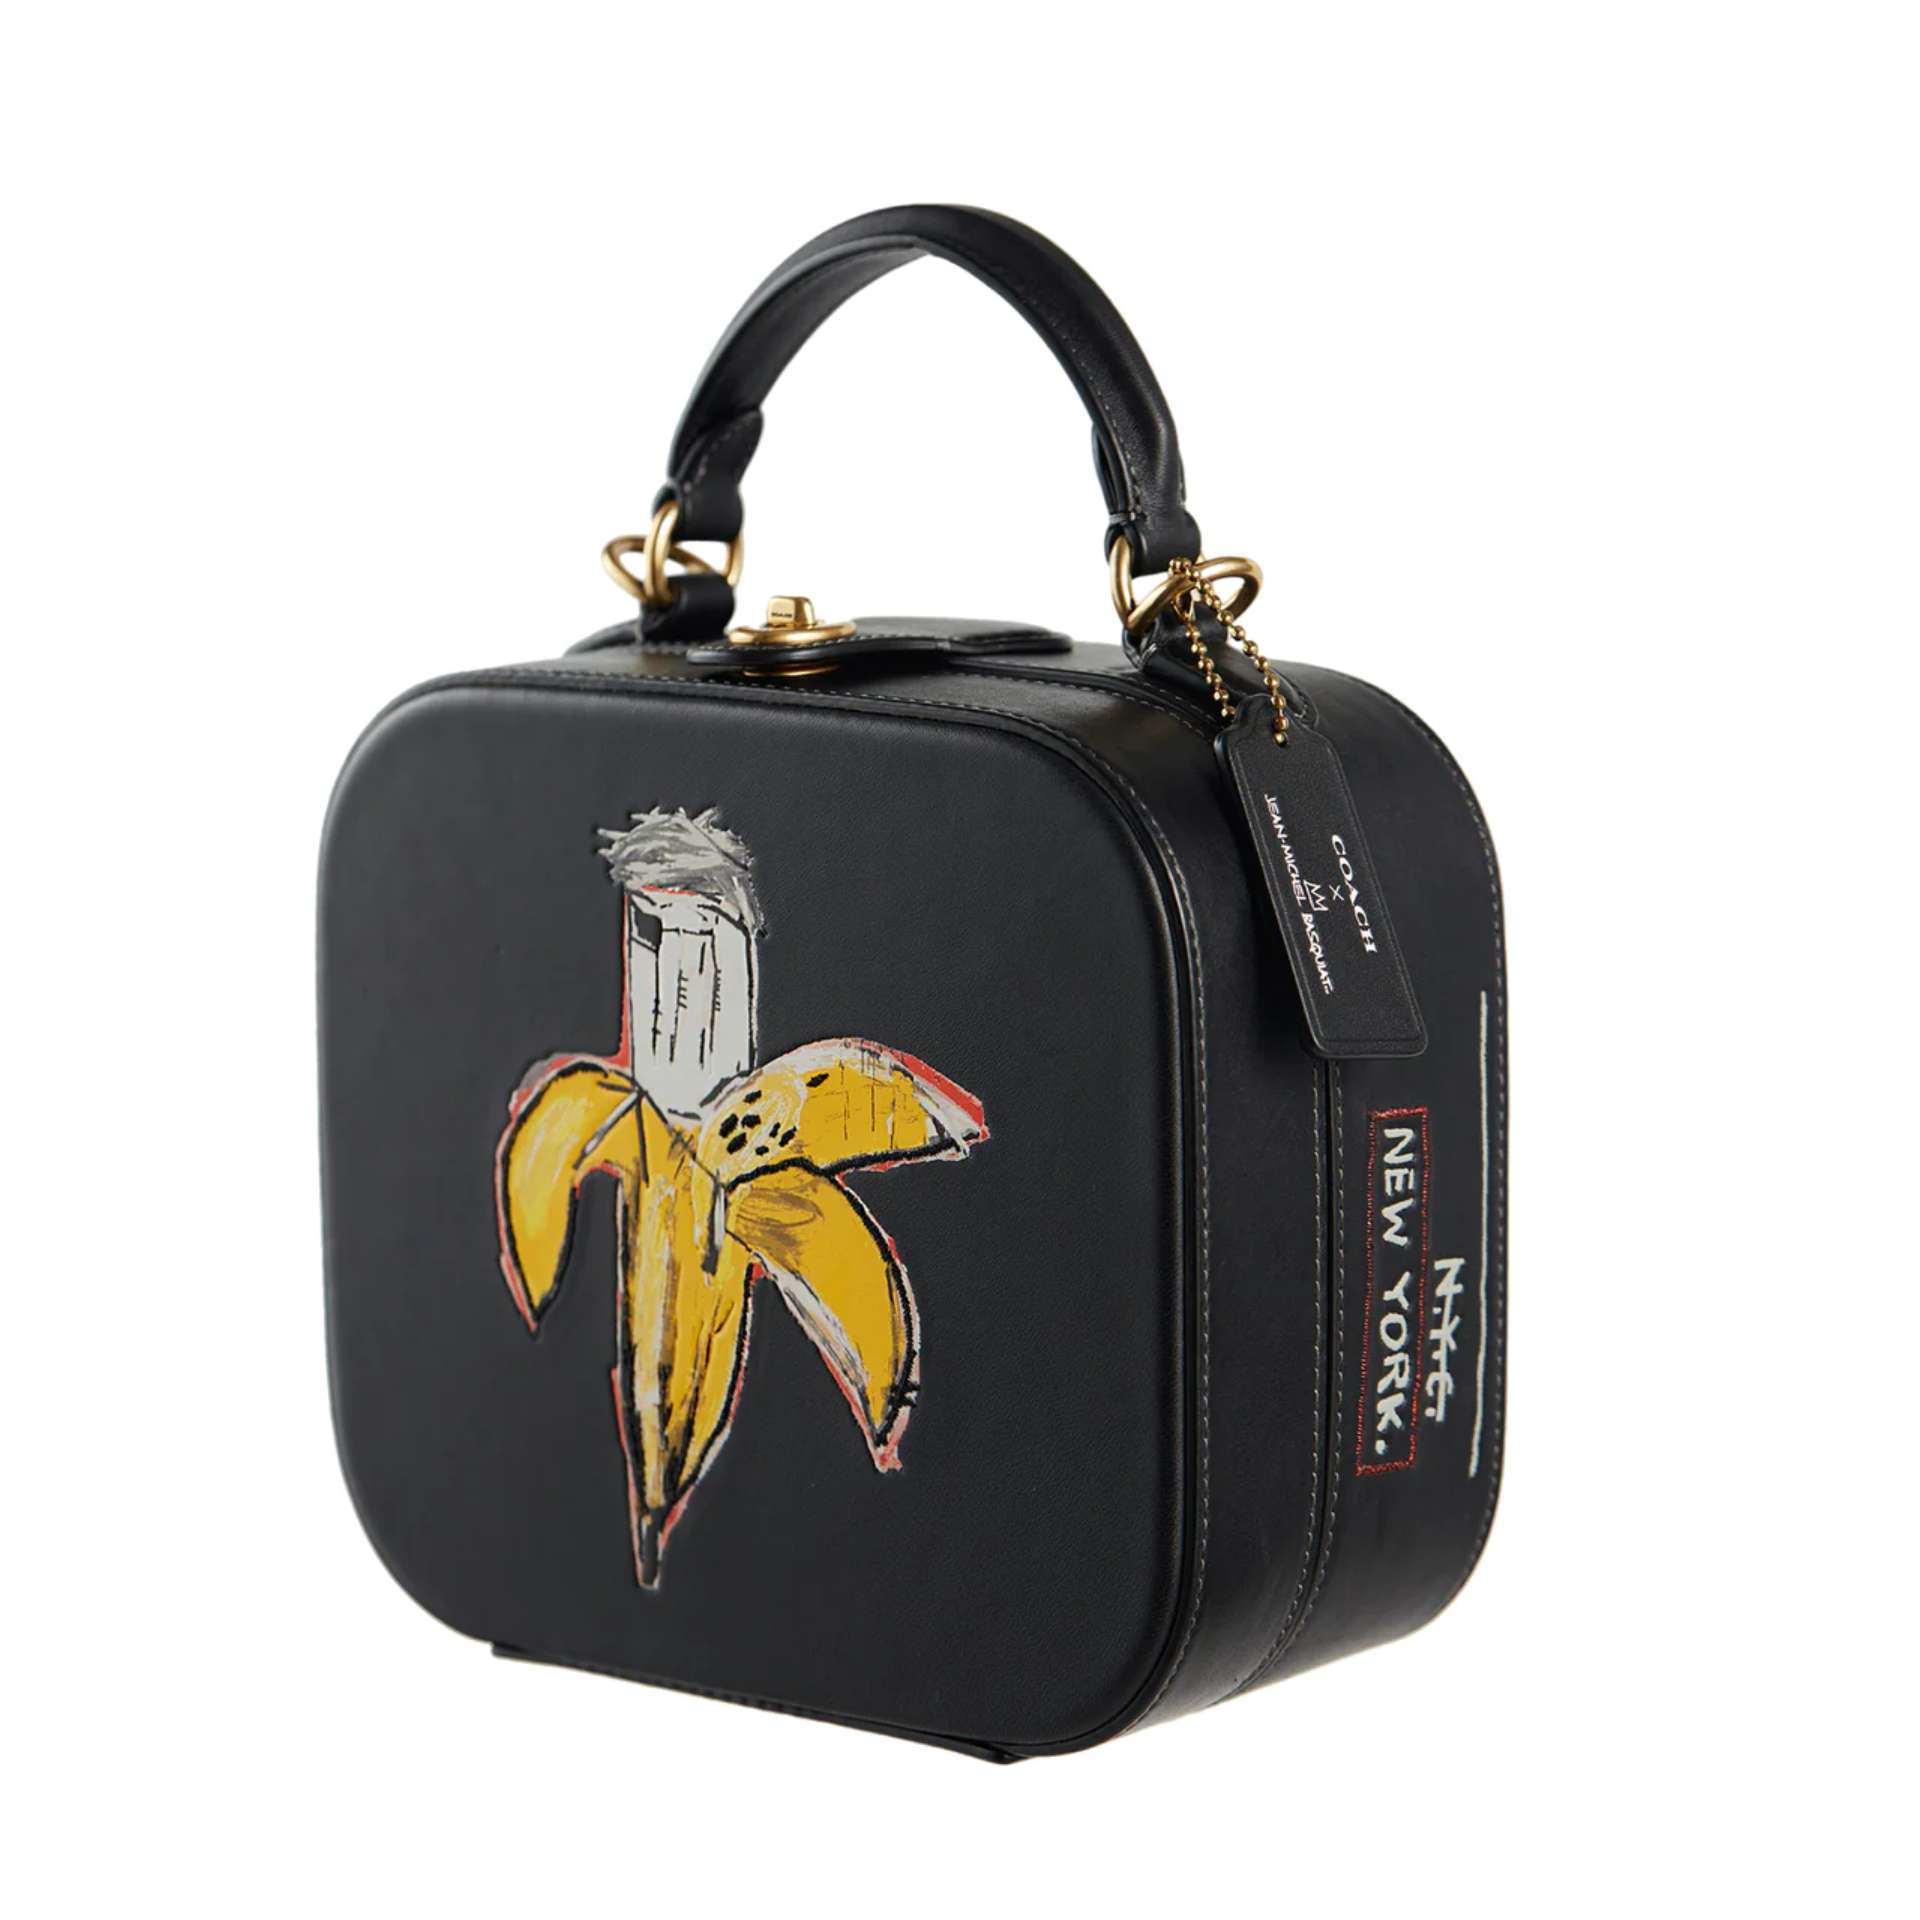 A square shaped black handbag with an imposed painting by Jean-Michel Basquiat of a banana